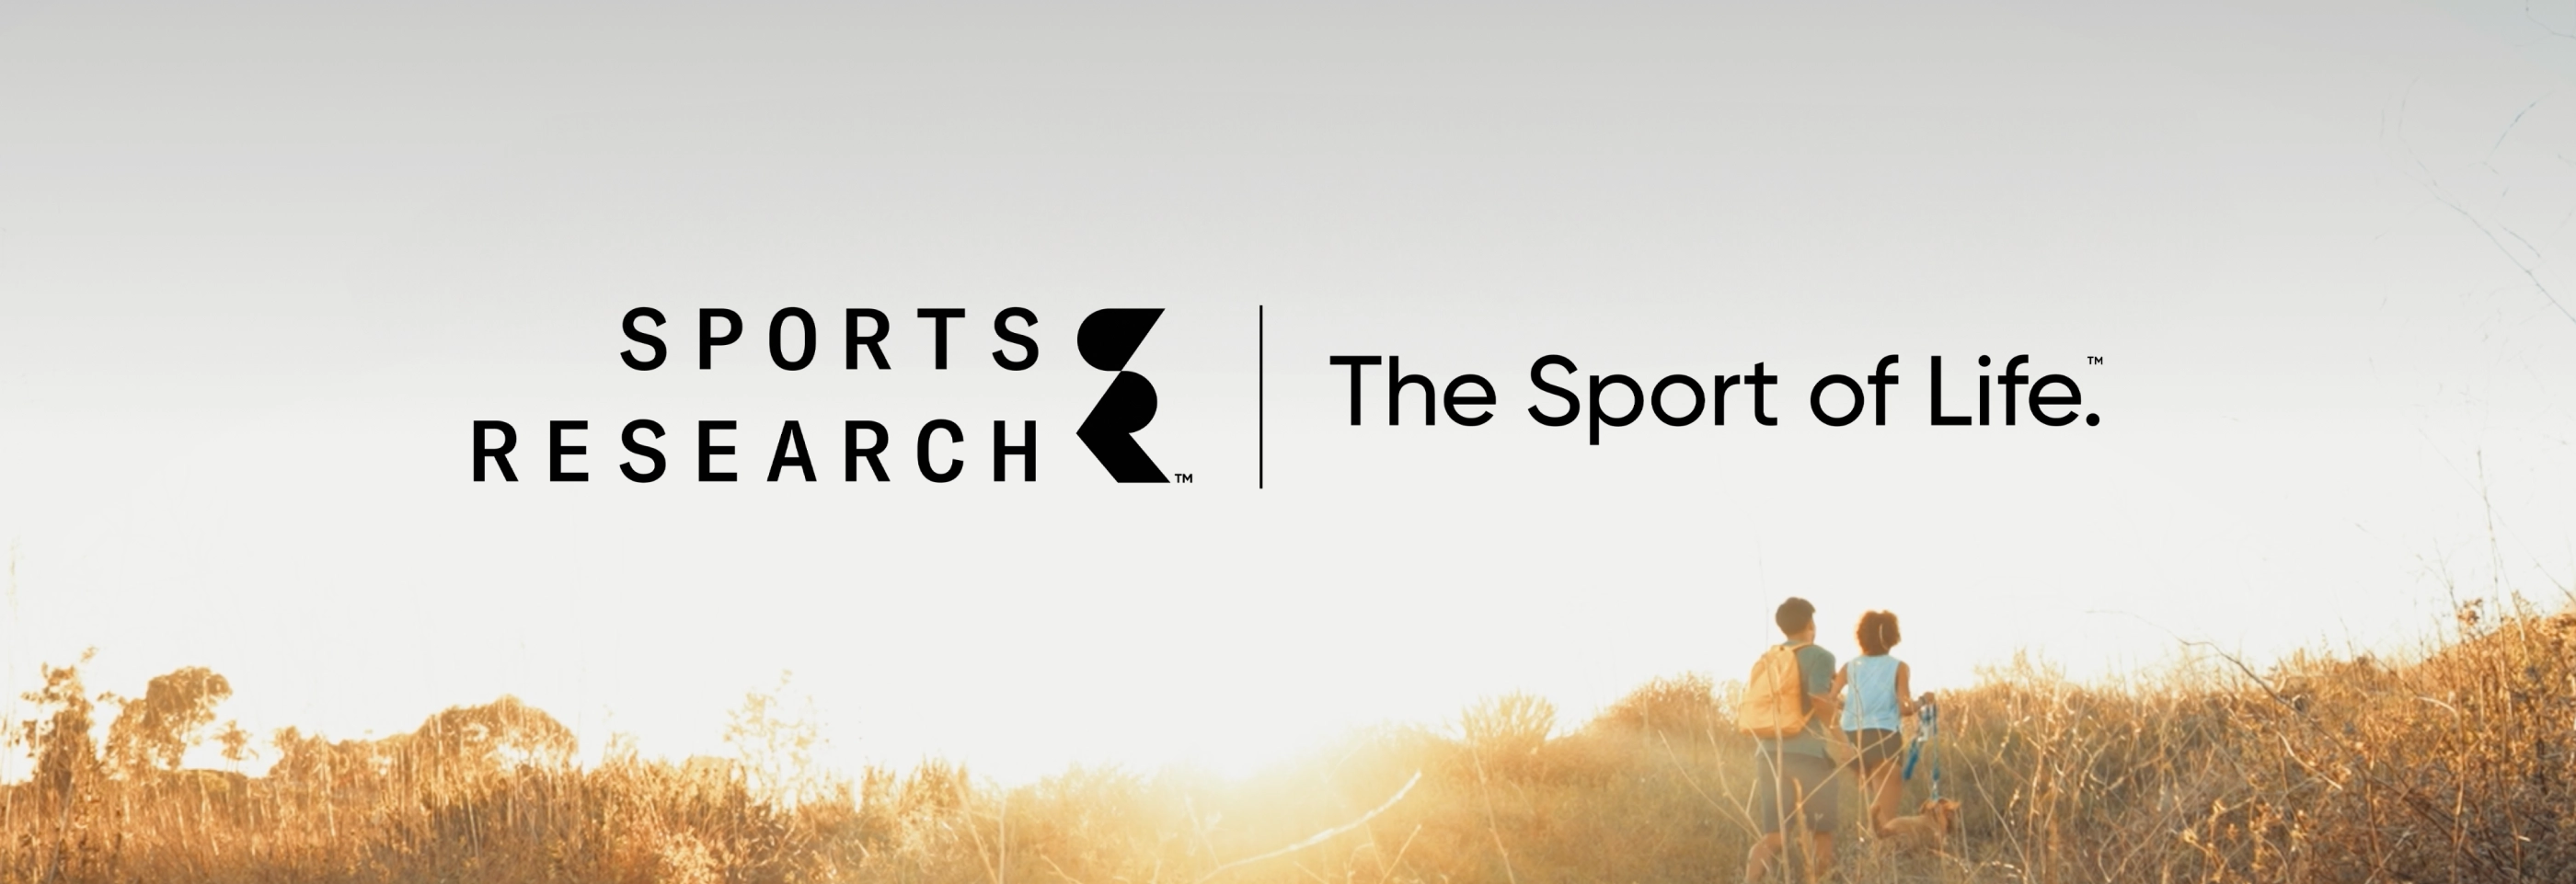 Sports Research Launches Inspirational “The Sport of Life